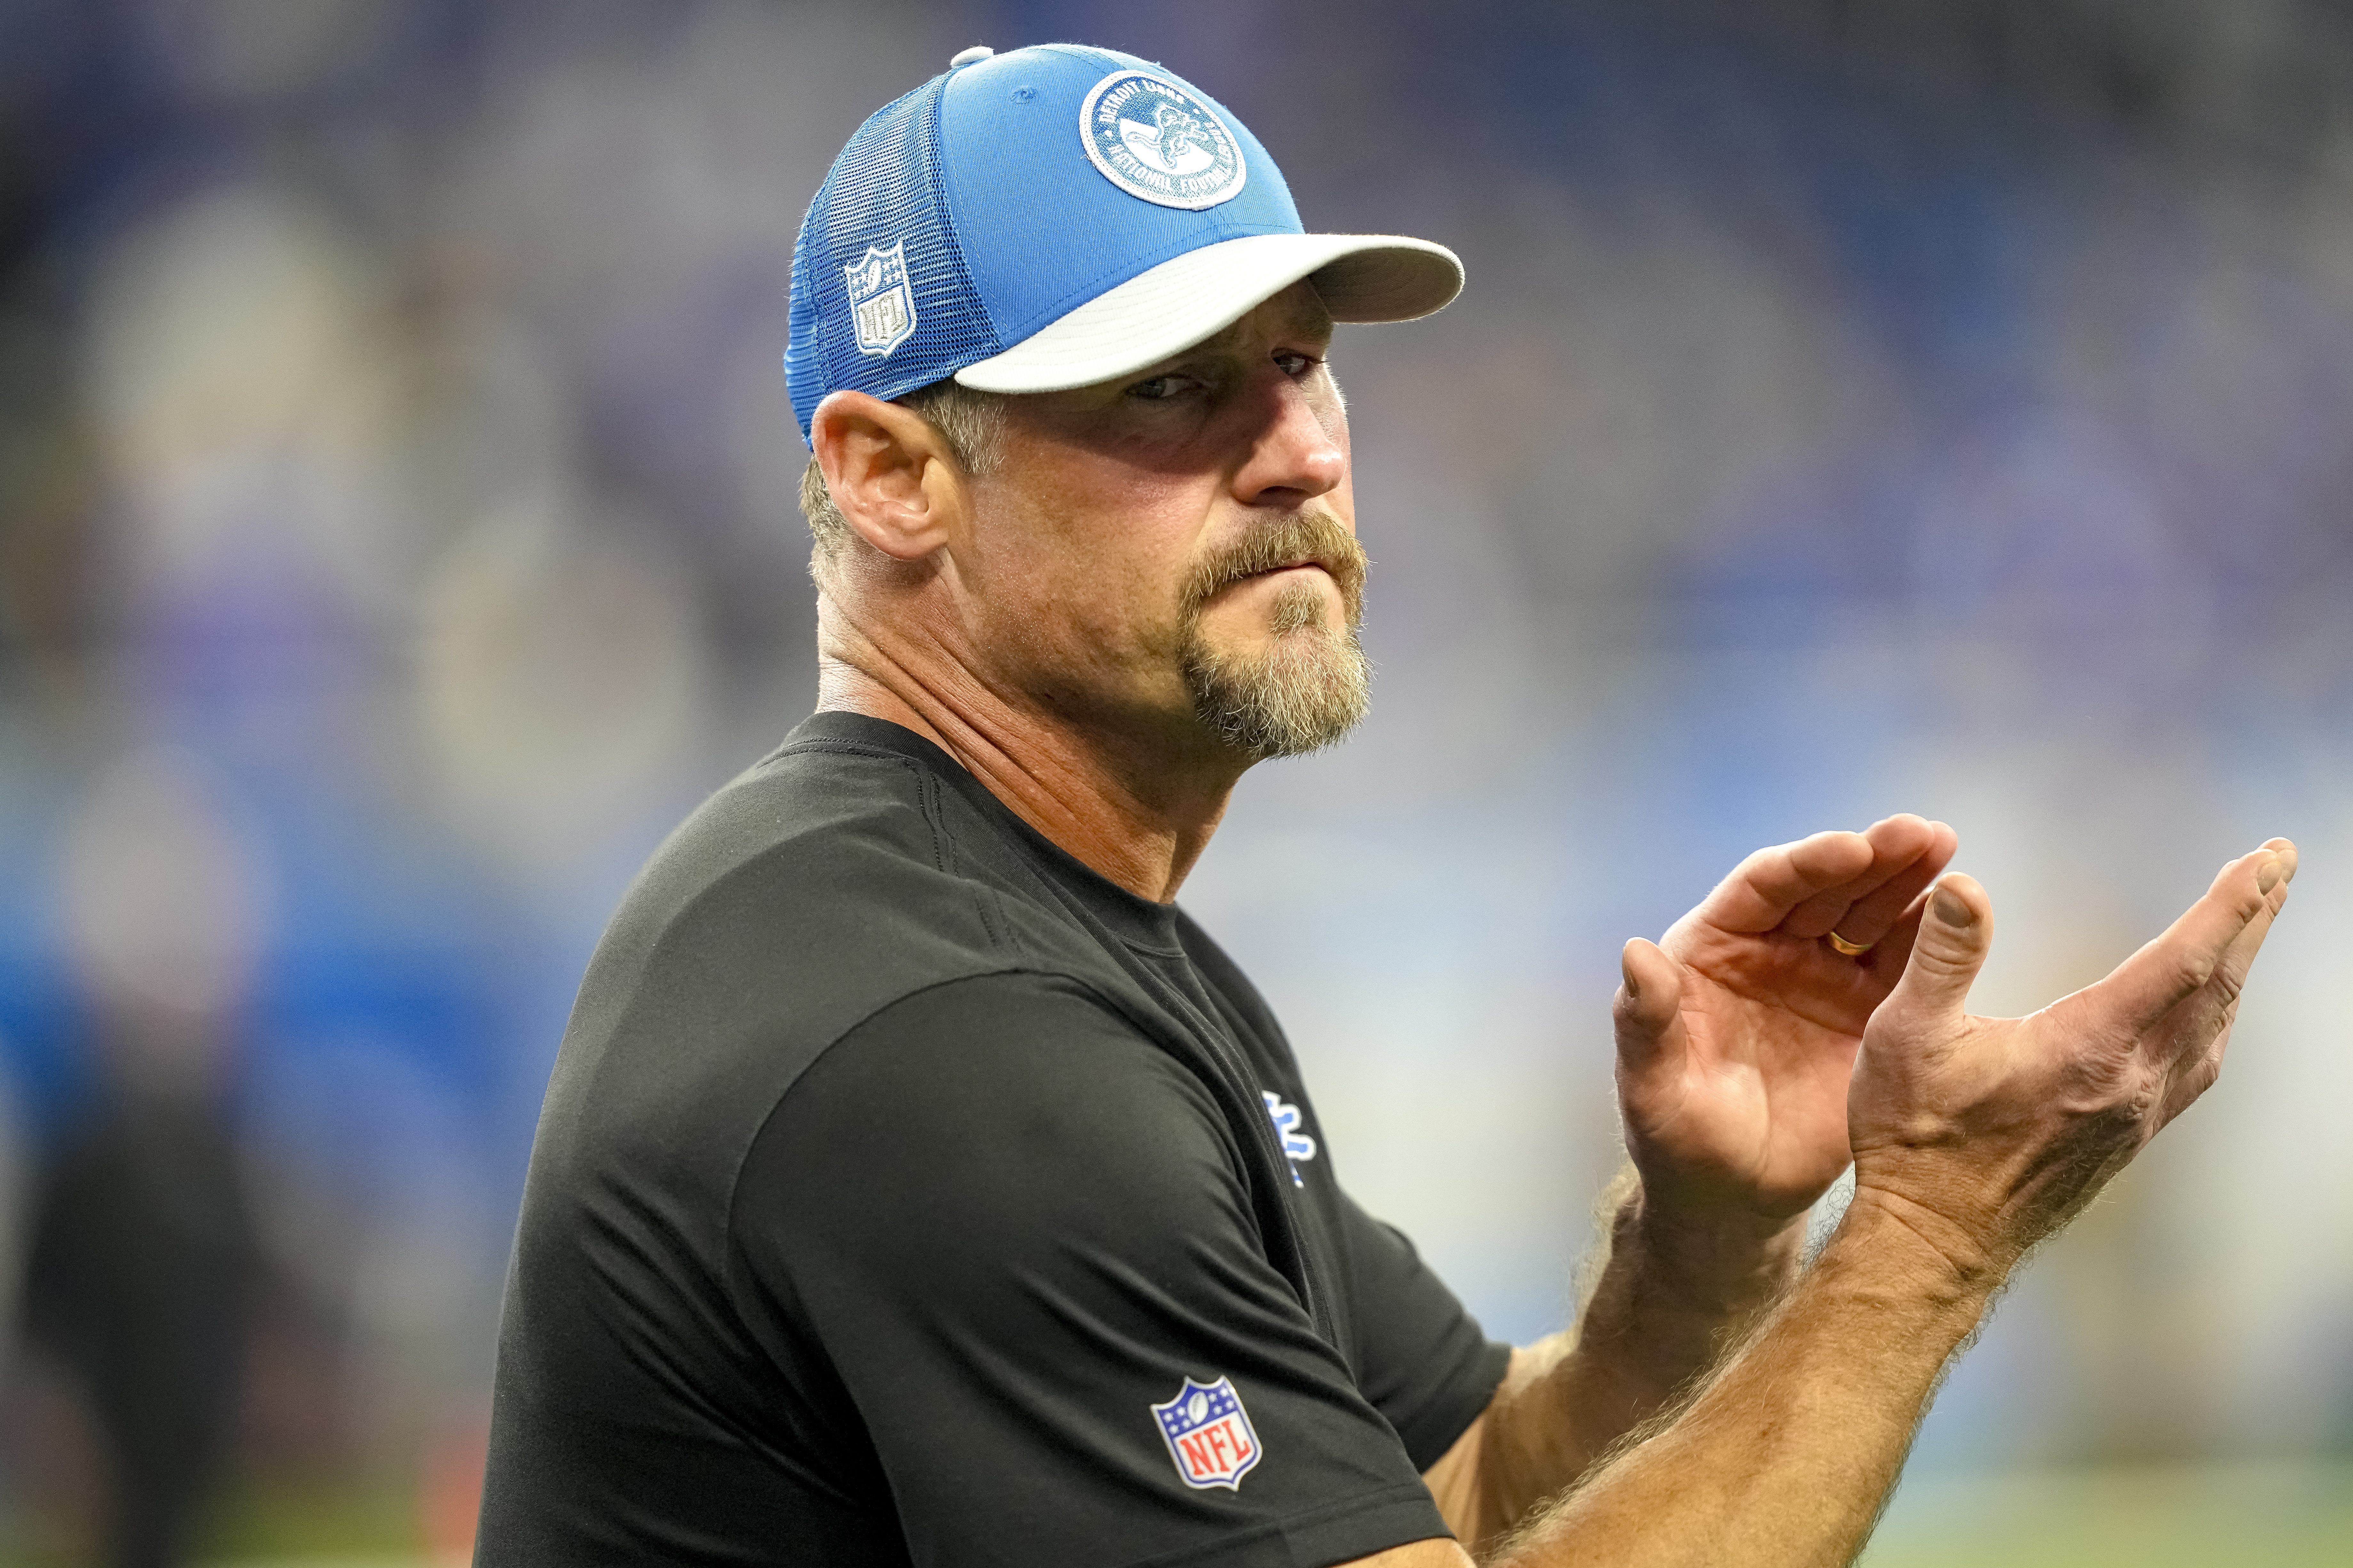 Same Old Lions? Now it's up to Dan Campbell and his team to prove